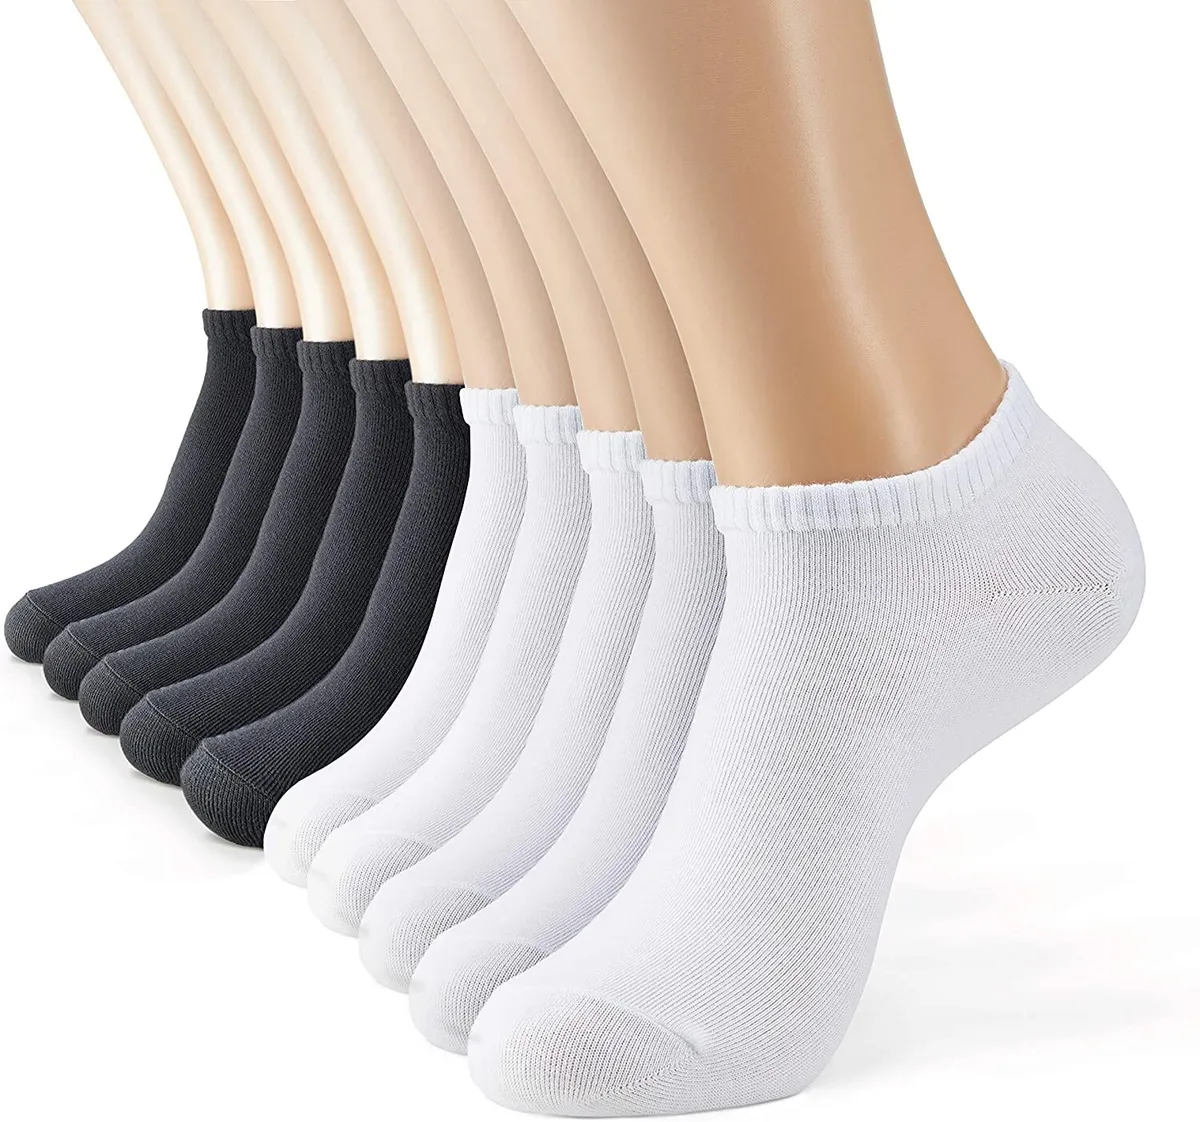 Lot 3-12 Pairs Mens Womens Sport Low Cut no-Show Casual Socks Size 9-11  10-13